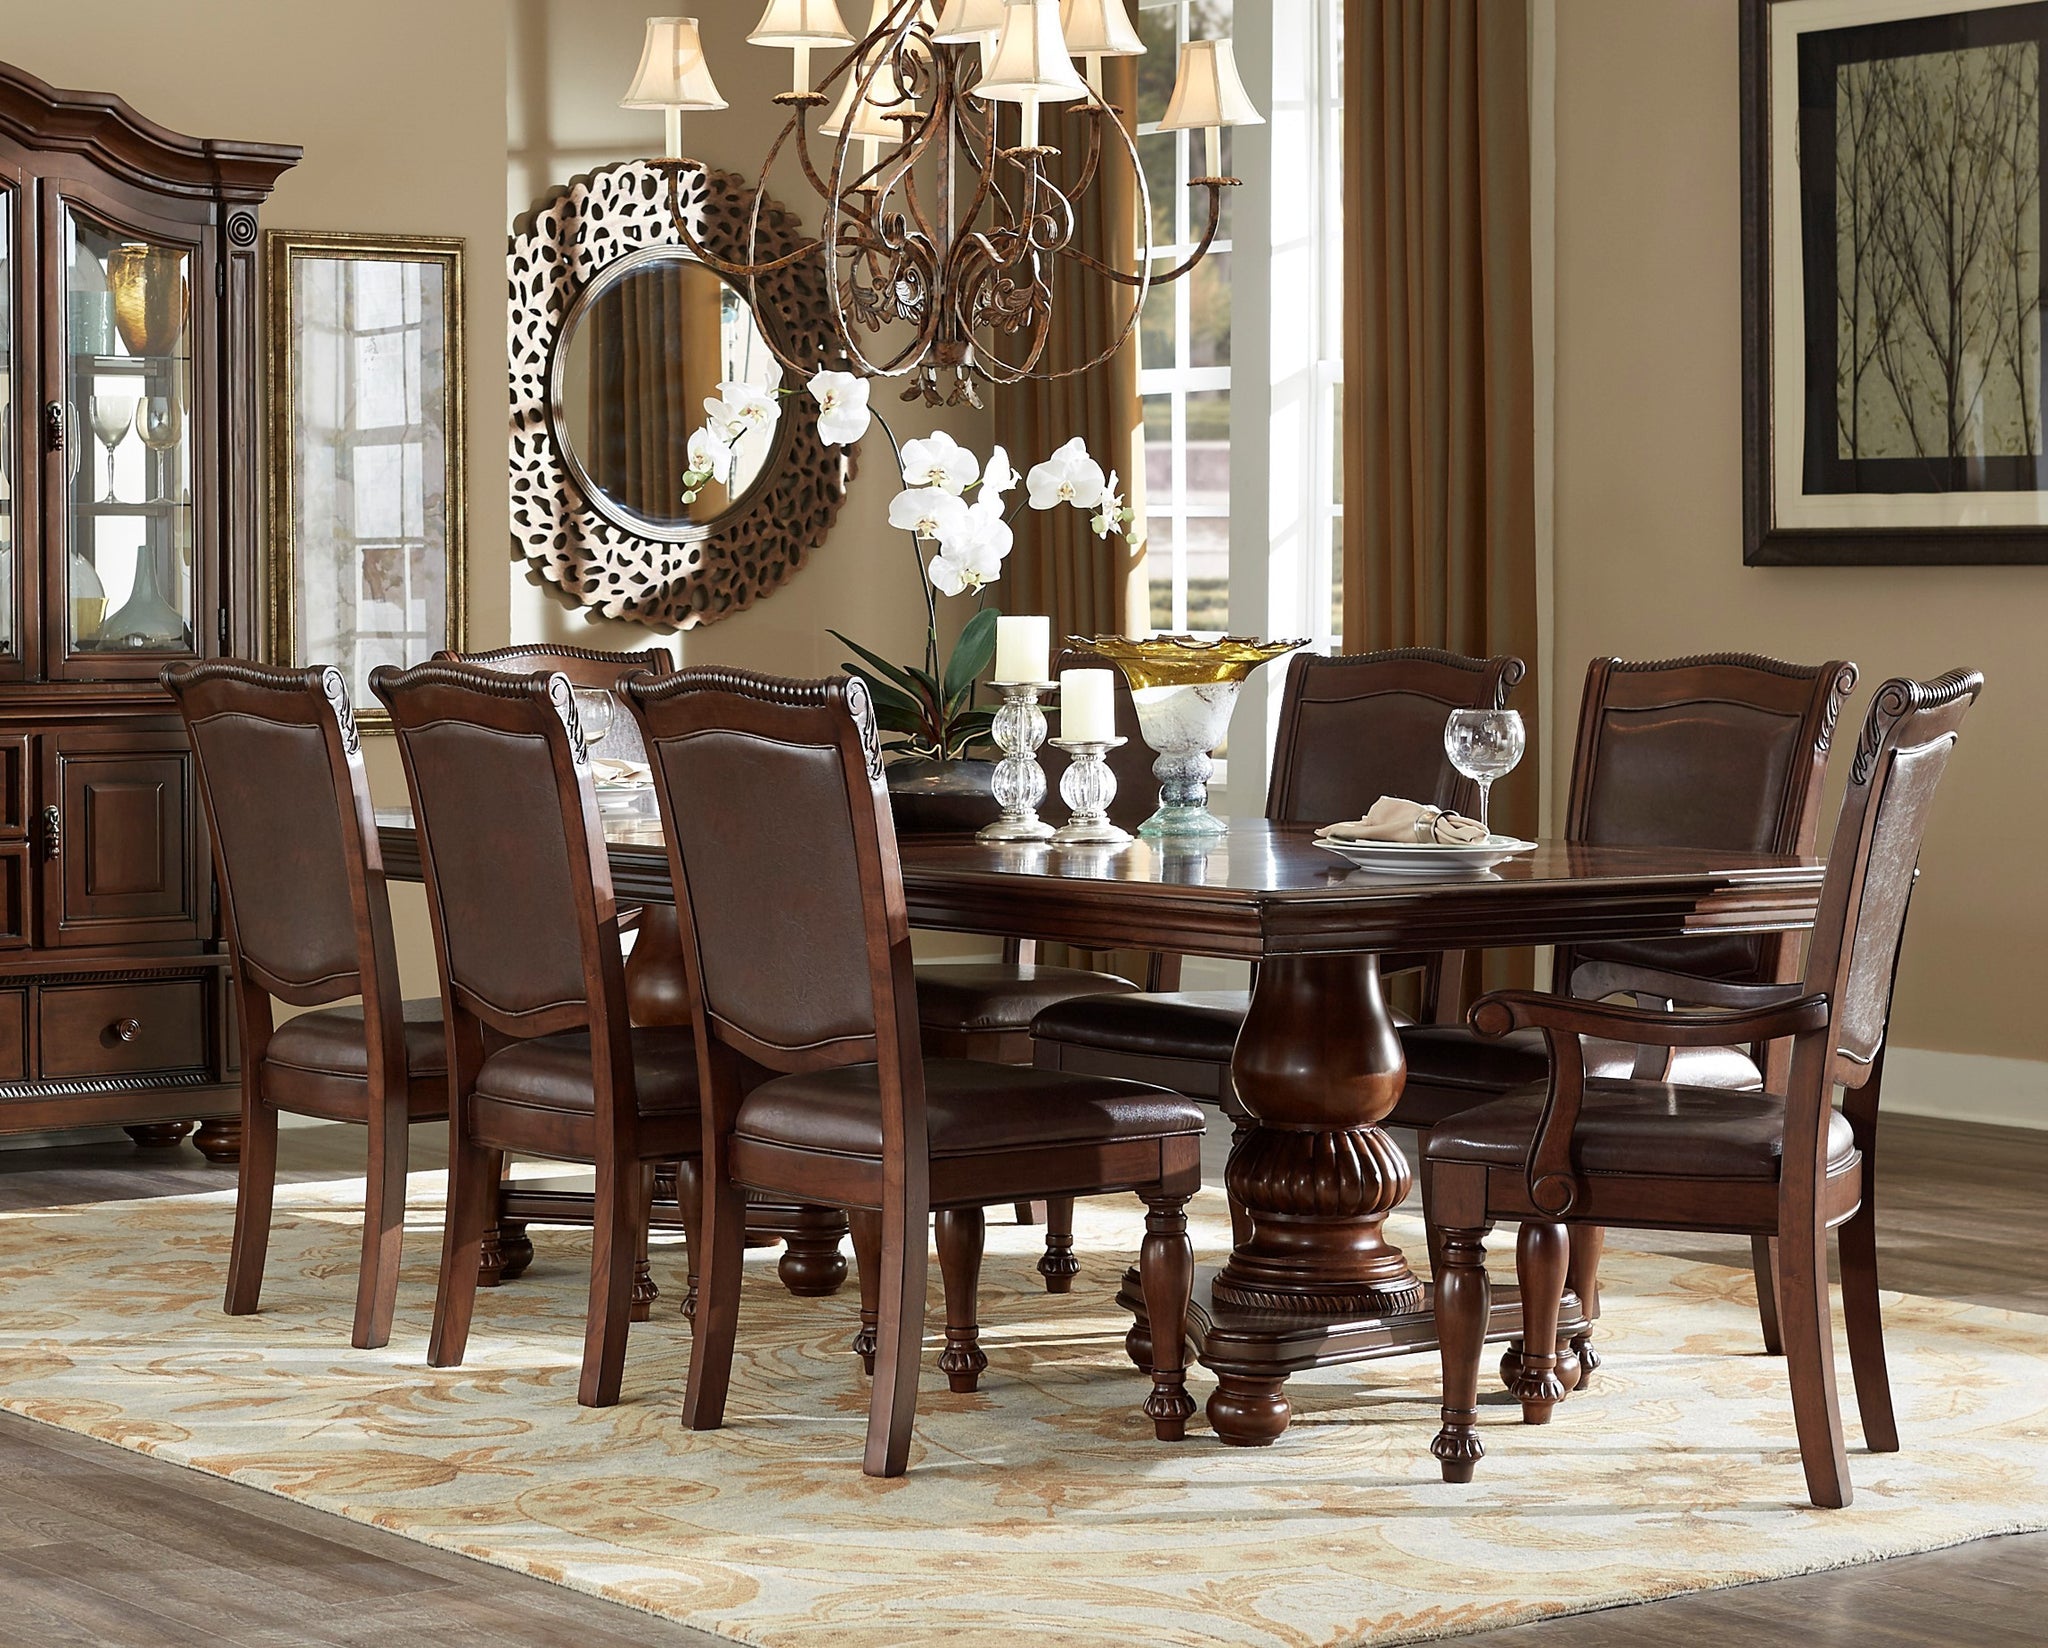 Traditional Style Dining Room Table w Leaf 2x wood-wood-brown mix-seats 8-wood-dining